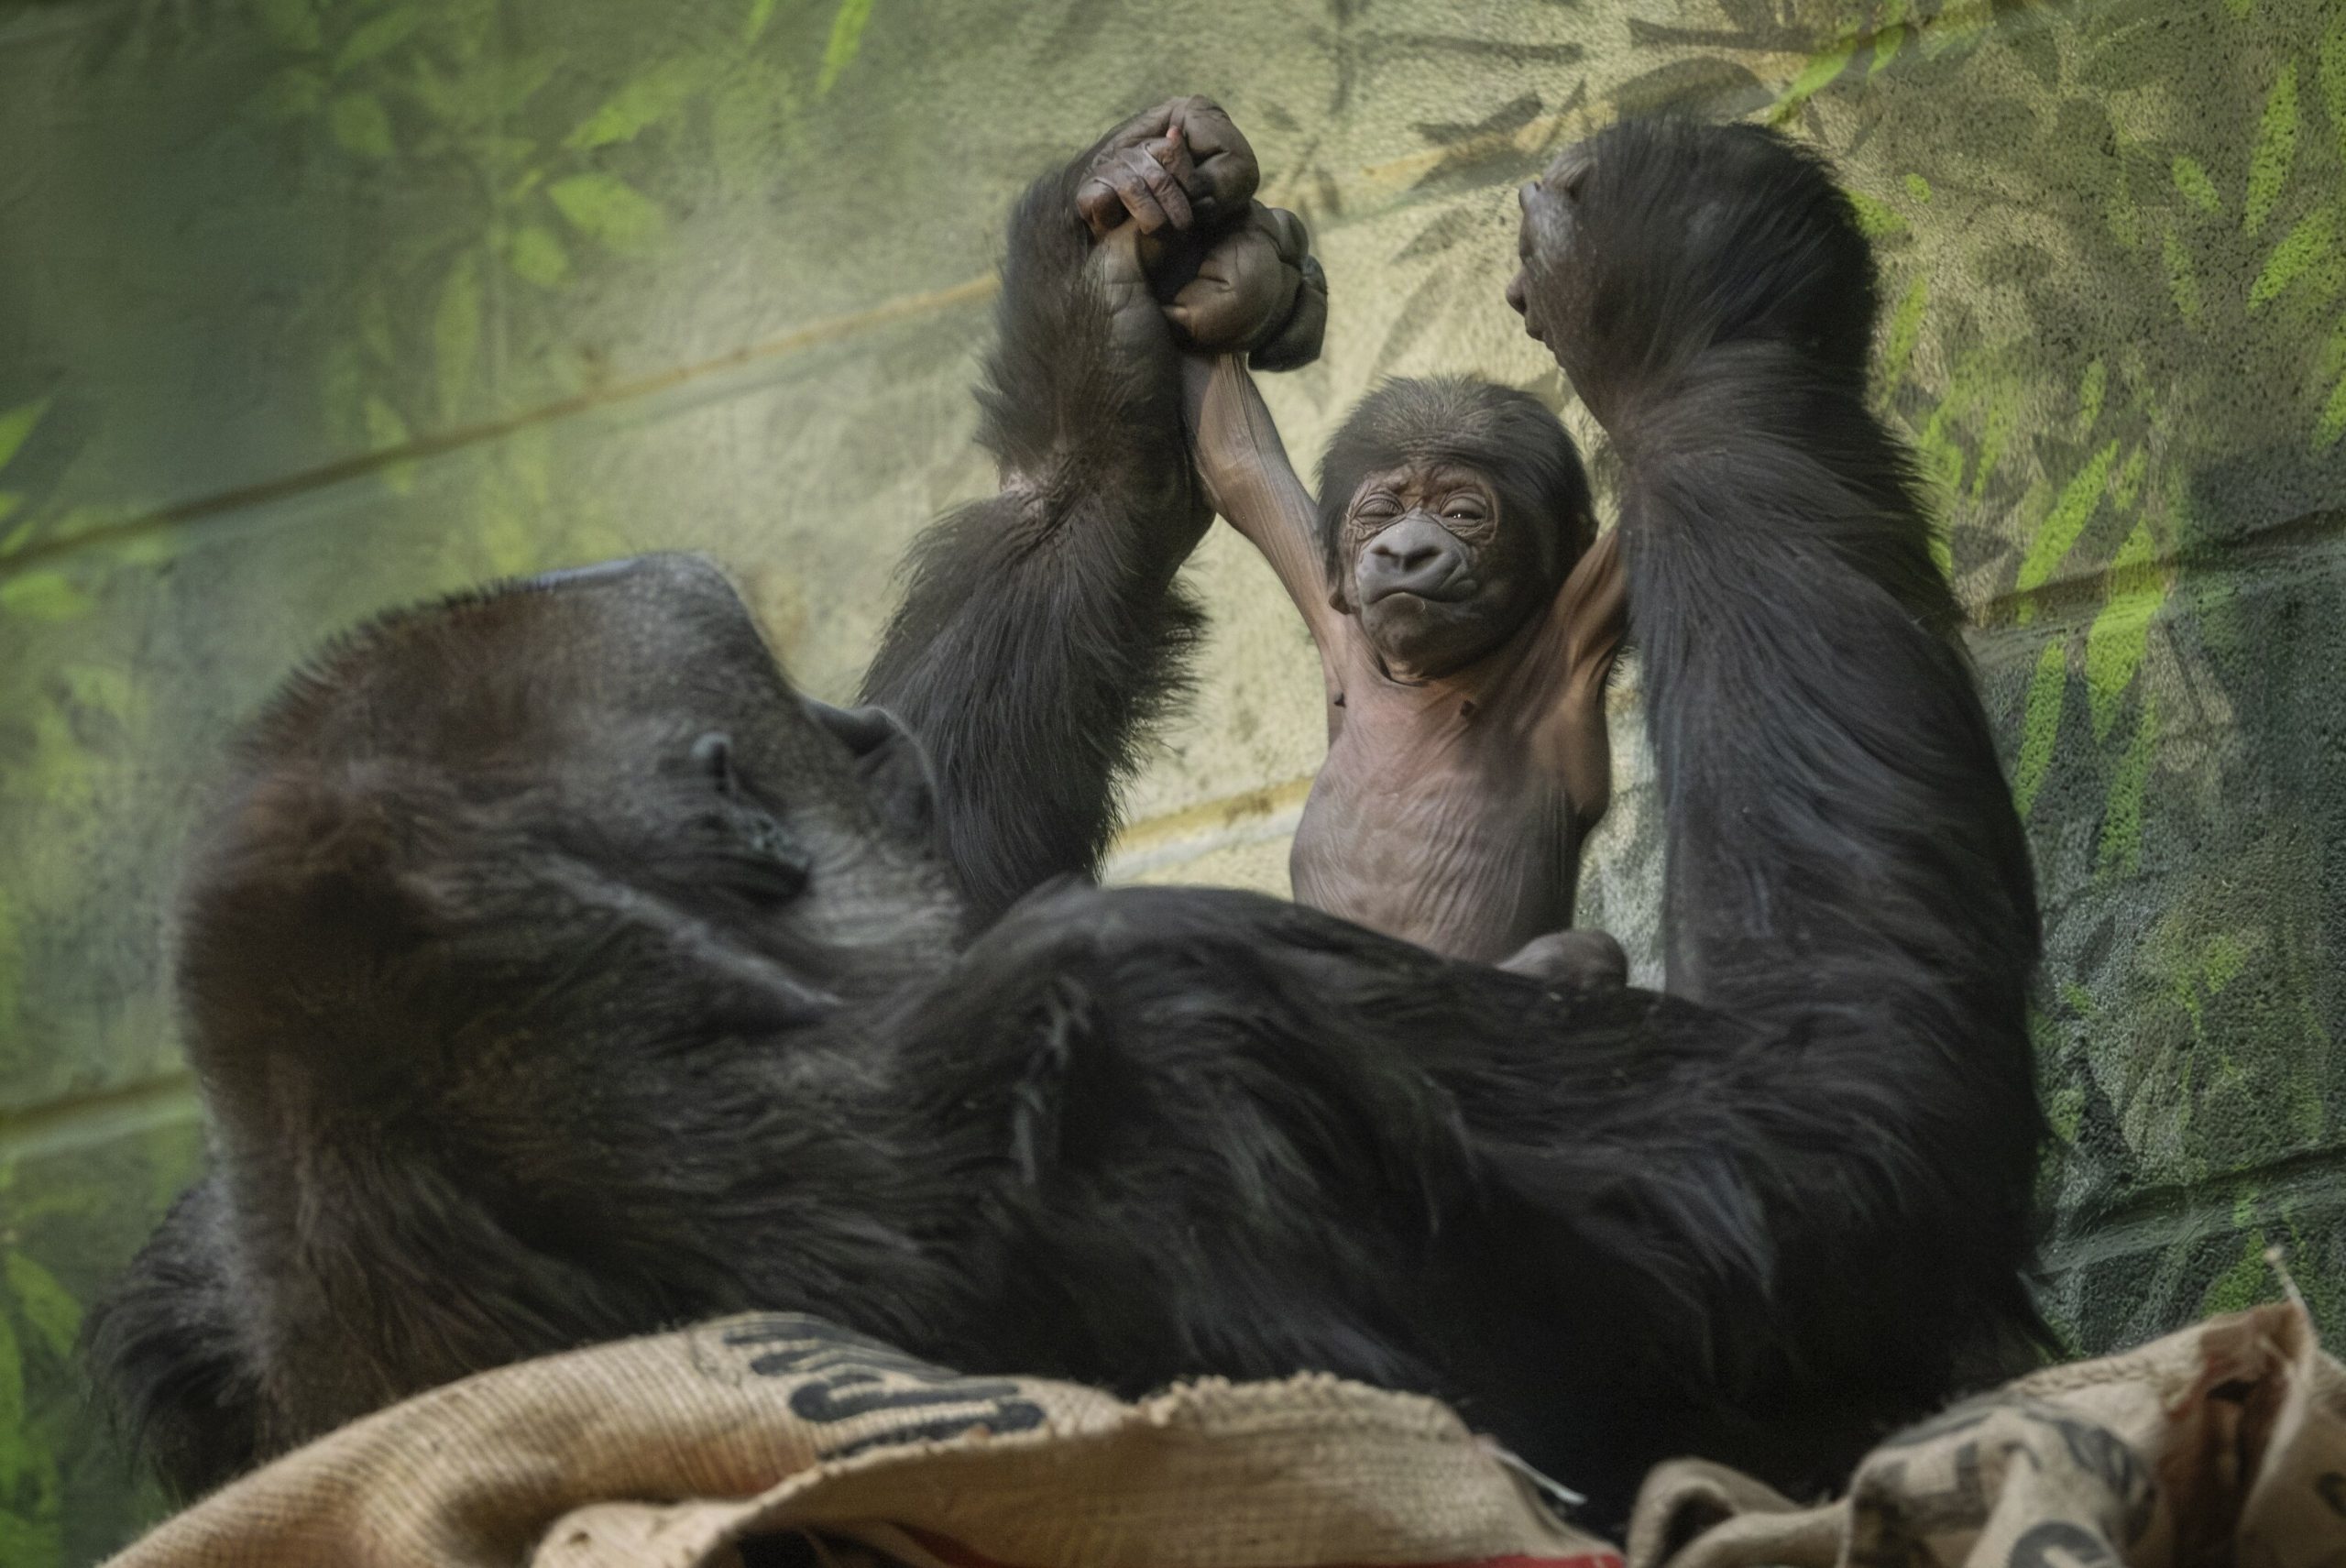 rejoice,-a-super-rare-(and-cute)-baby-gorilla-has-just-been-born-at-london-zoo